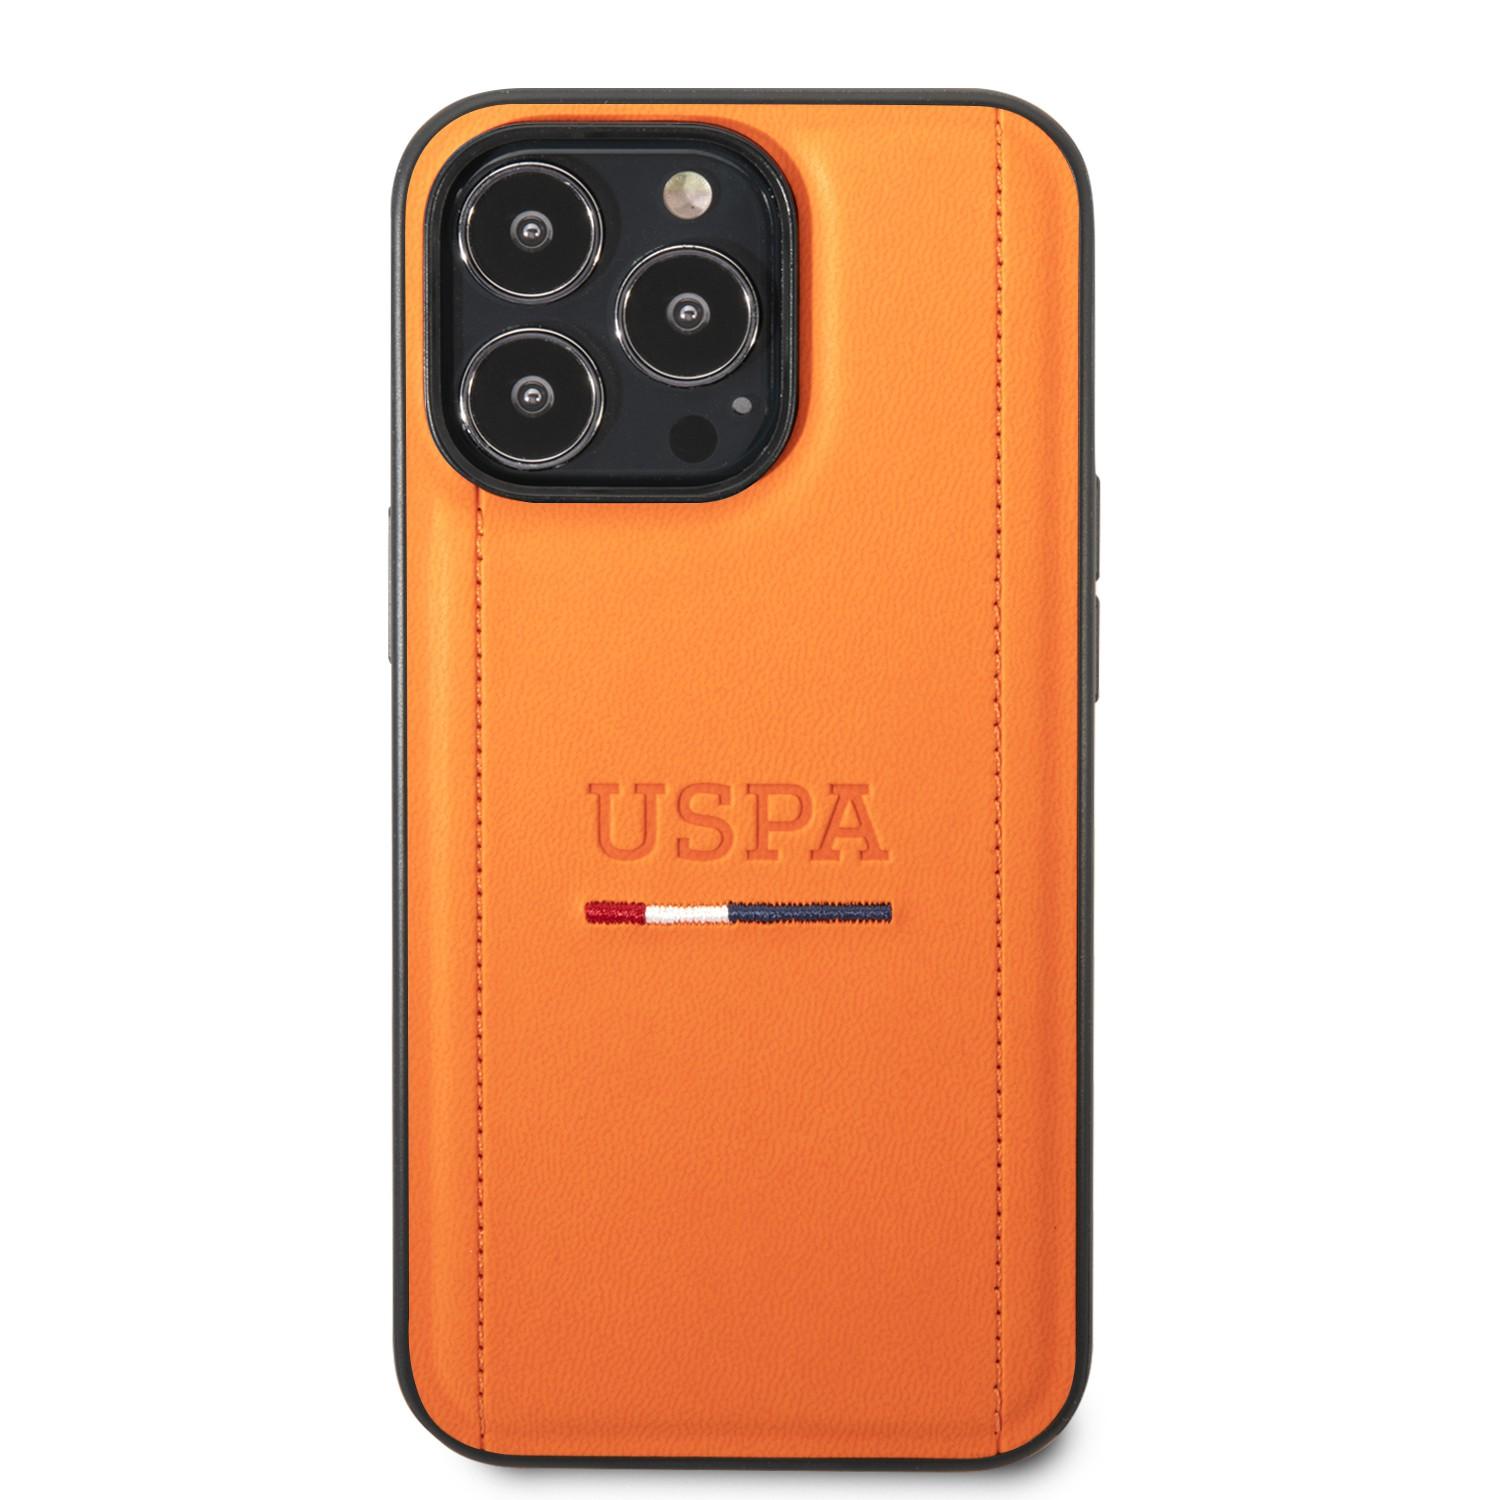 U.S.Polo Assn. USPA PU Leather Case With Tricolor Stitches & Initials For iPhone 14 Pro - Orange [ USHCP14LPINO ]